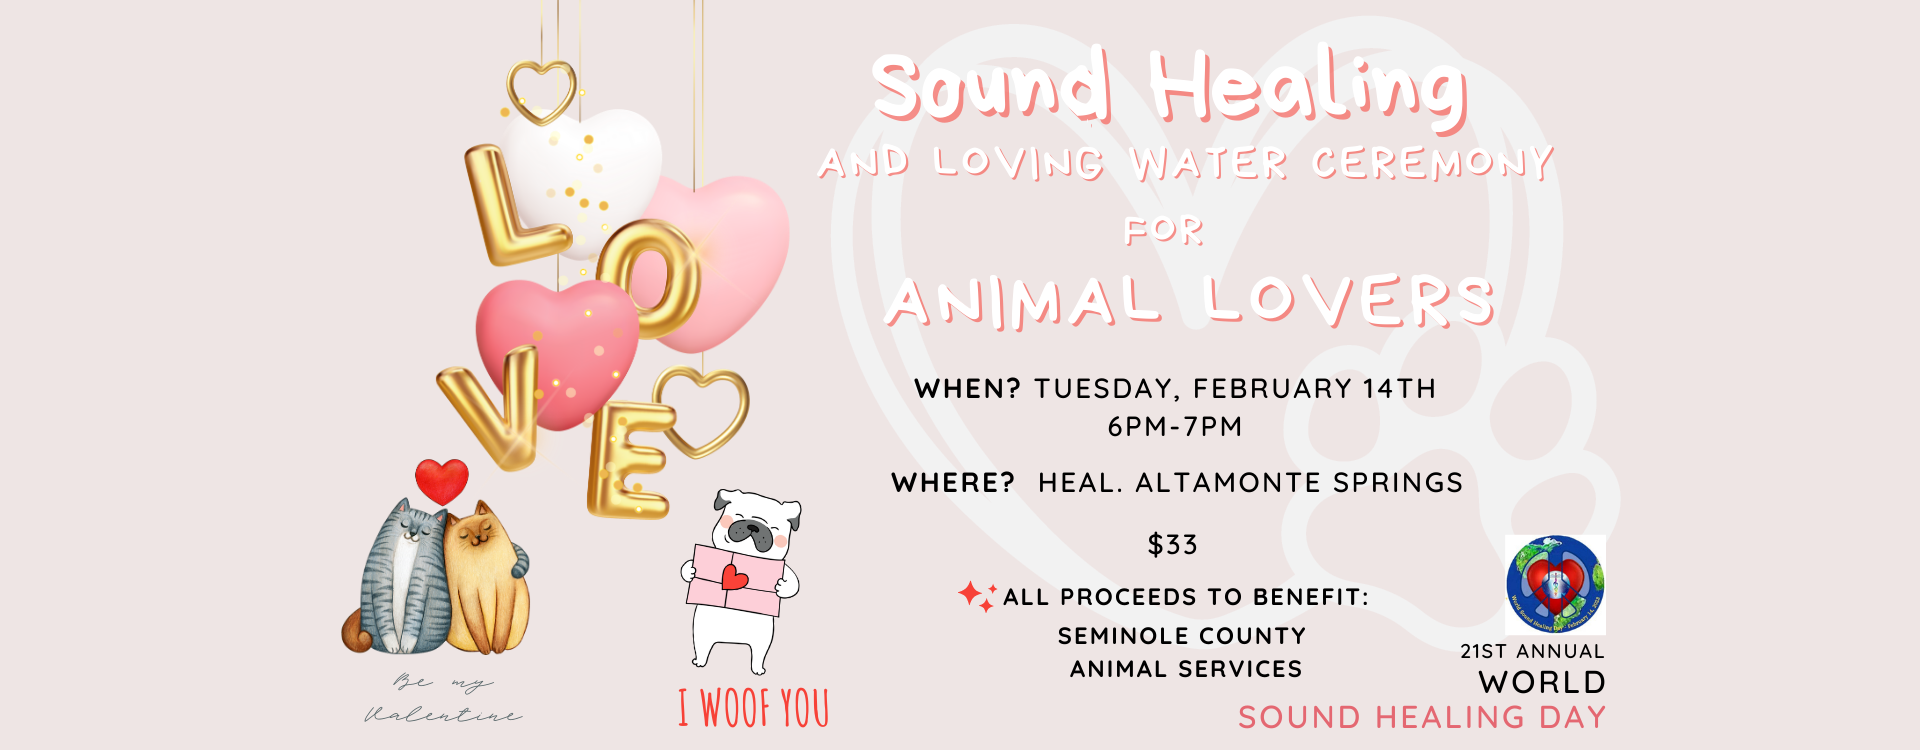 Sound Healing & Loving Water Ceremony for Animal Lovers